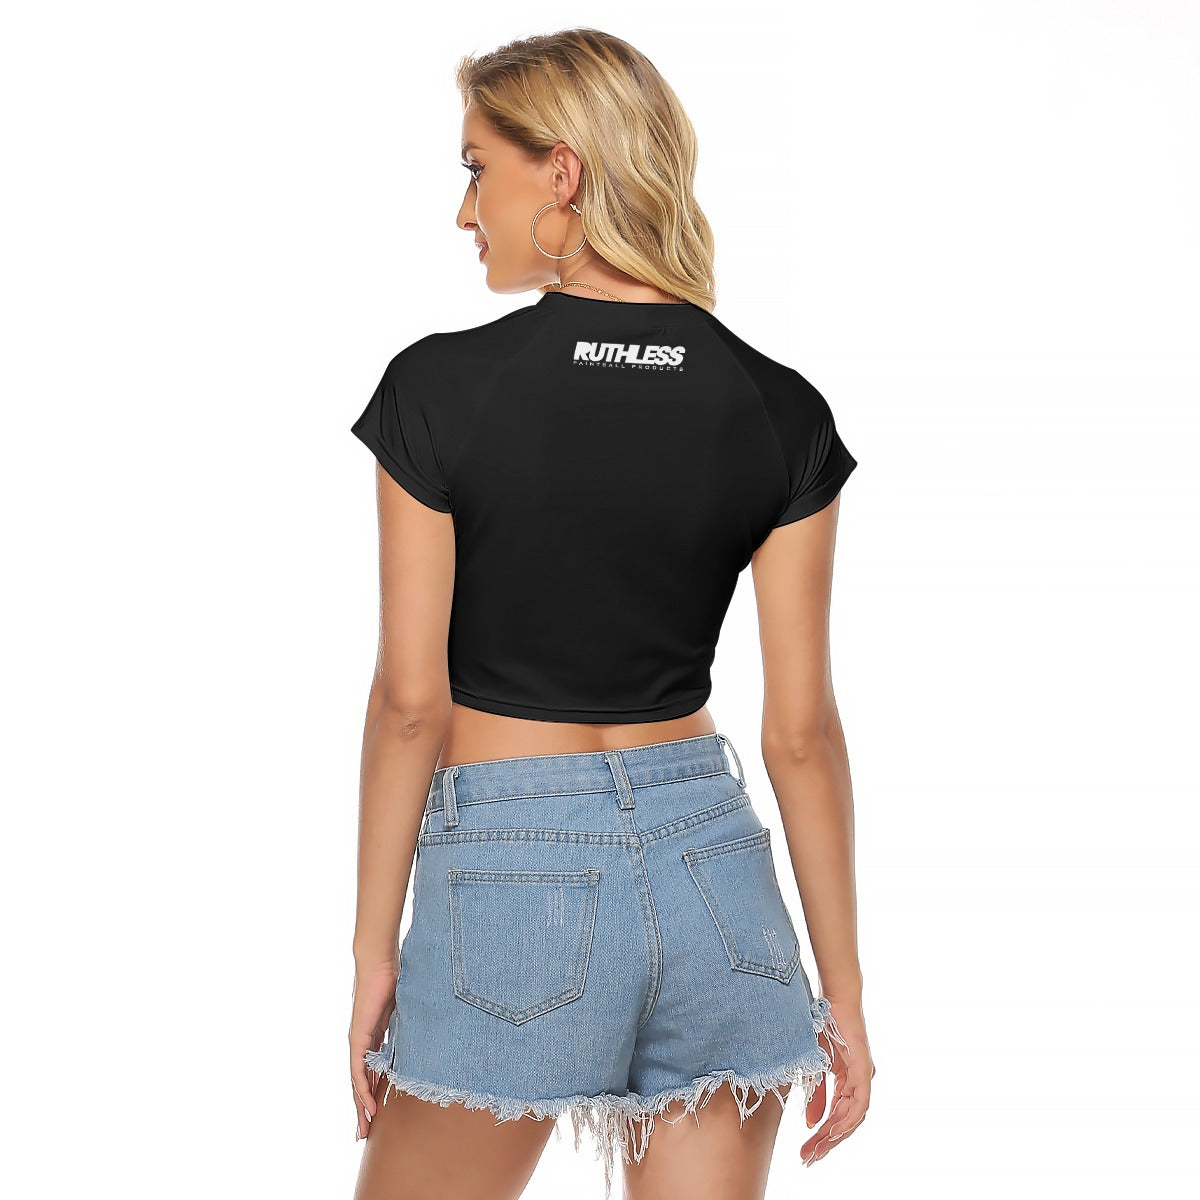 Bloody Ruthless Crop Top